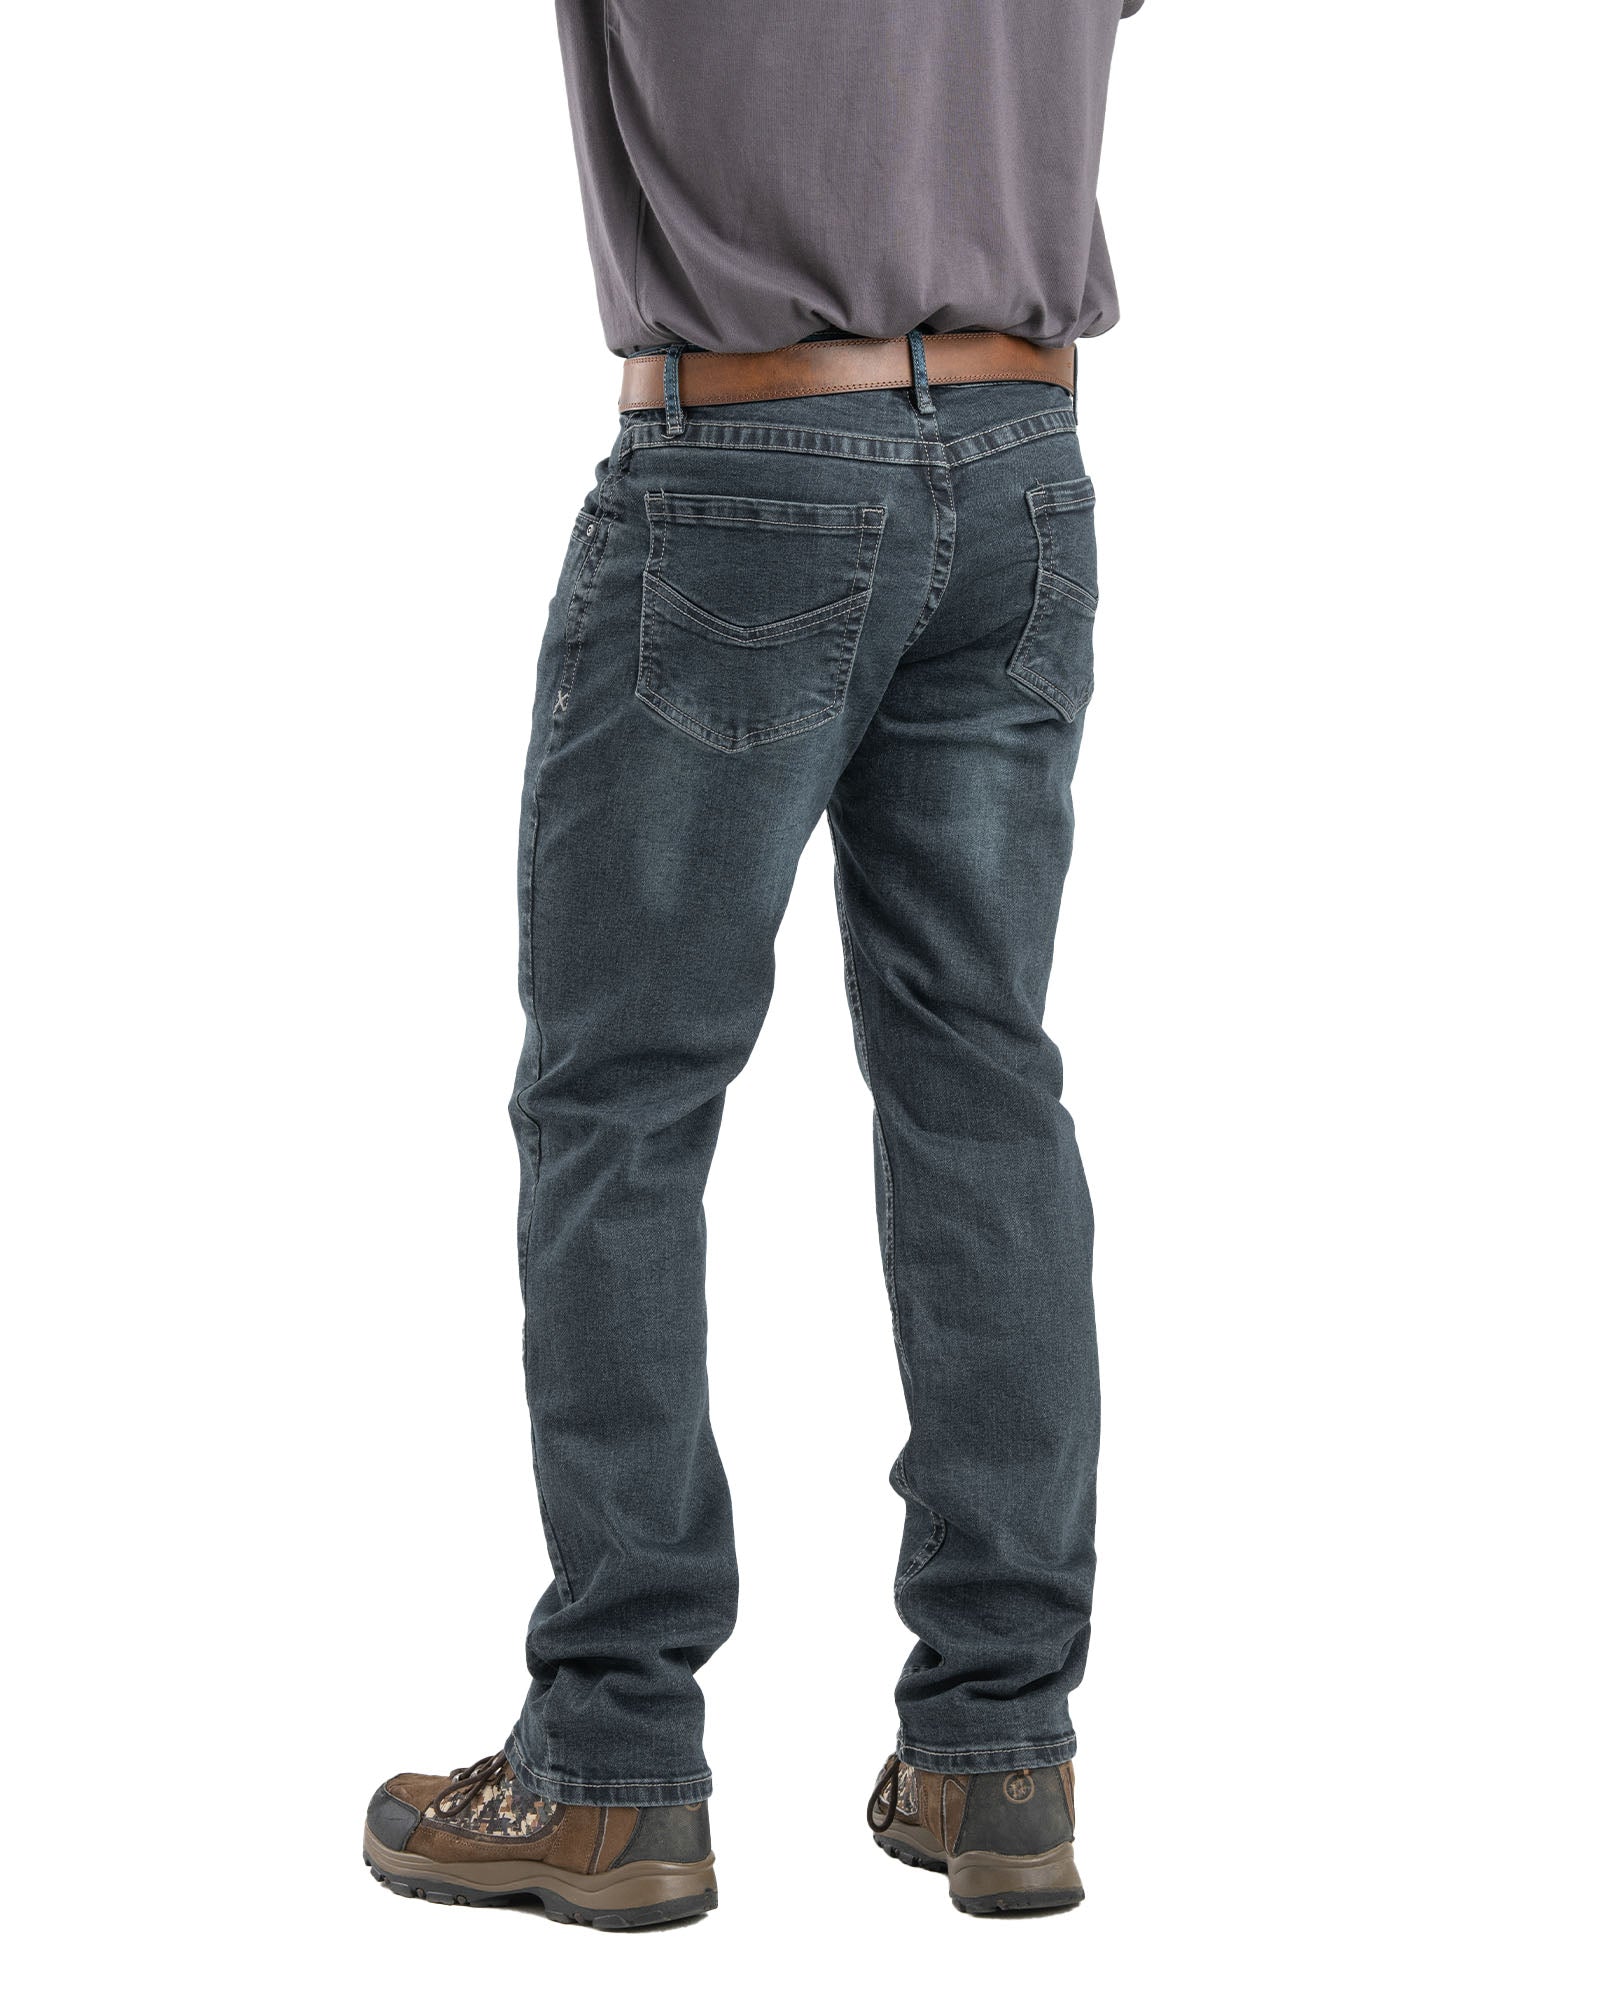 P624LSN Highland Flex Relaxed Fit Straight Leg Jean